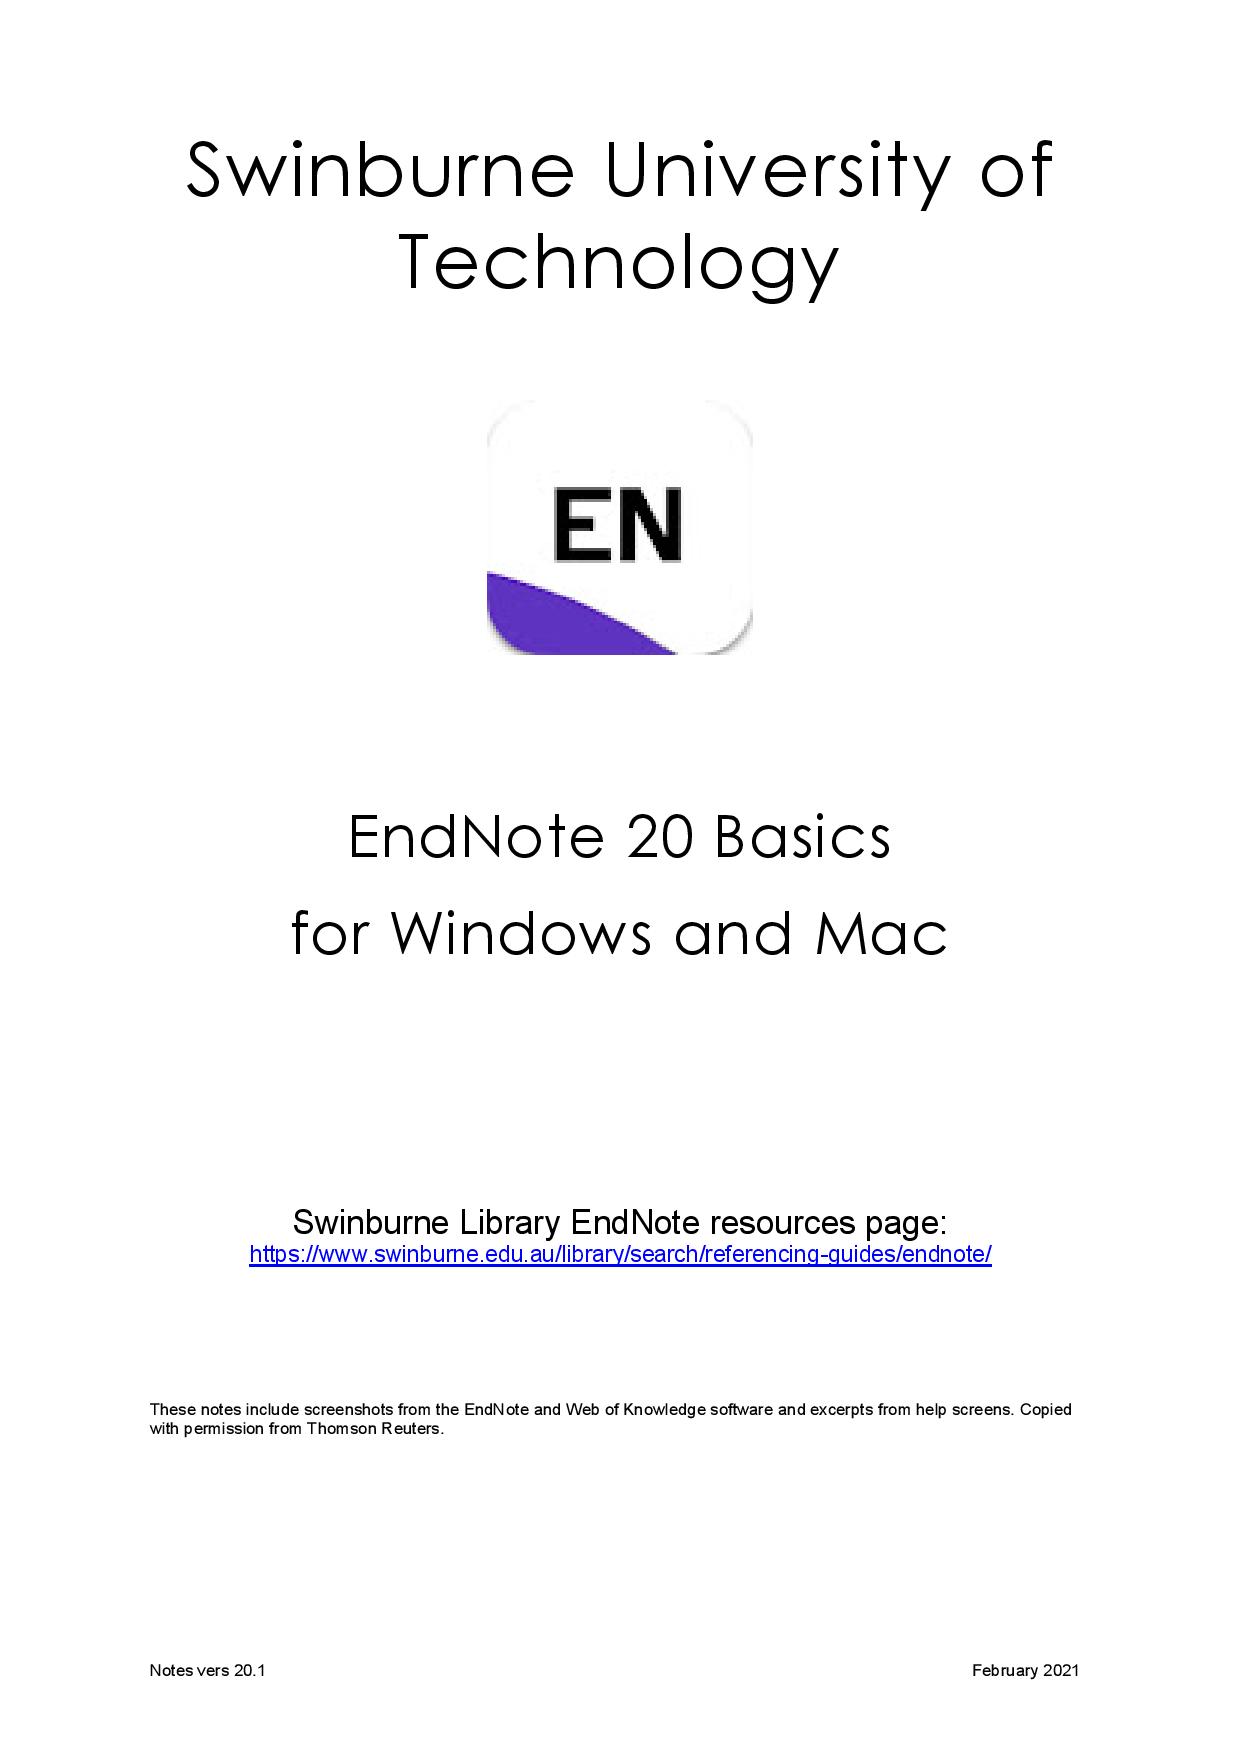 Swinburne Guide to EndNote for desktop (Windows and Mac)